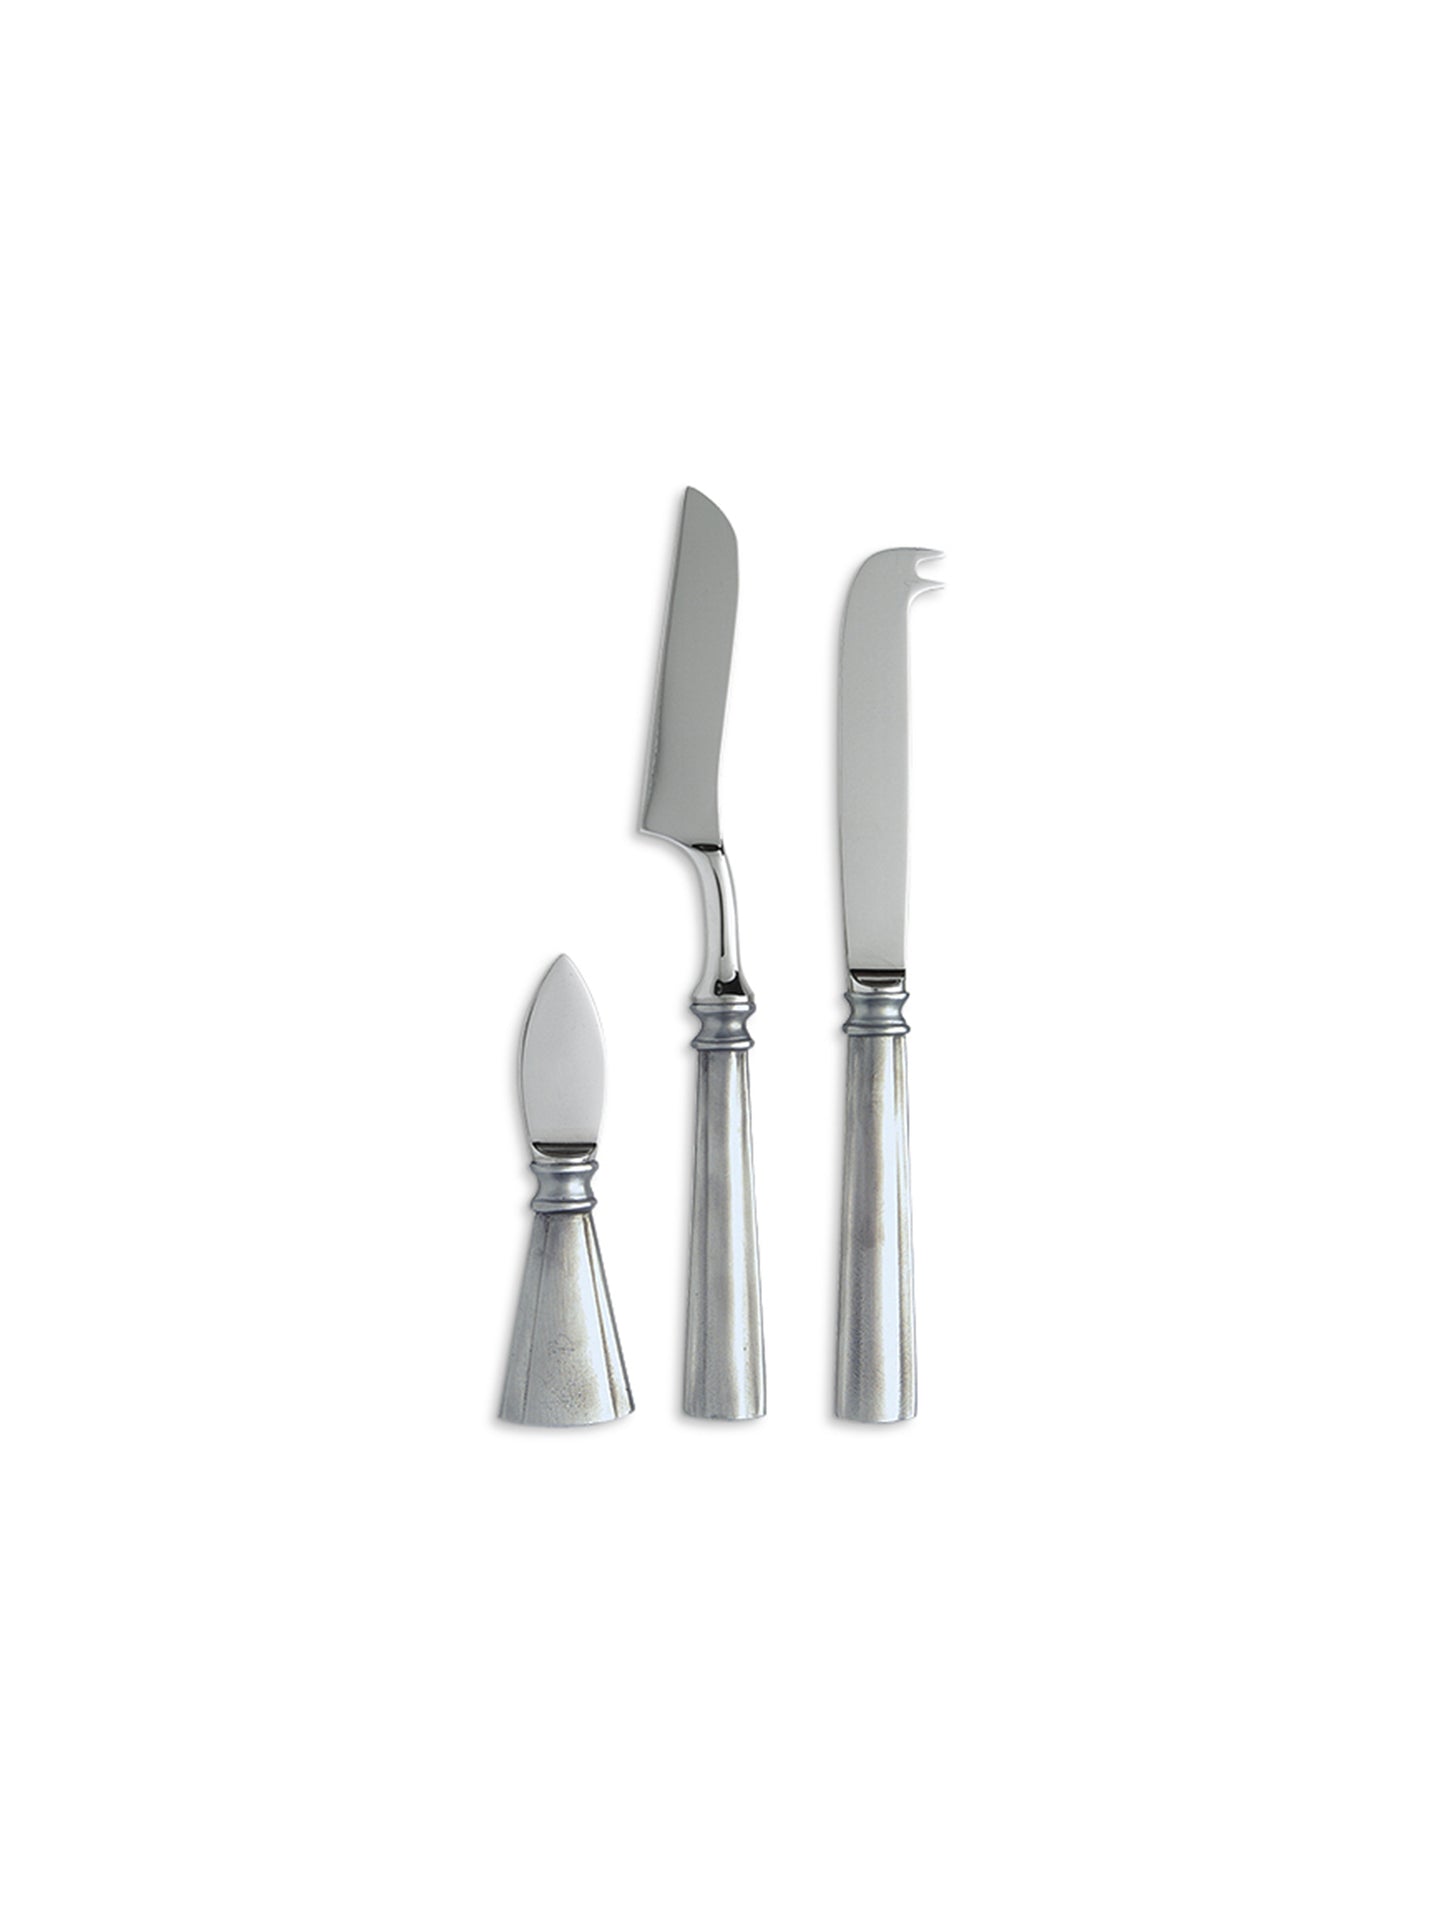 MATCH Pewter Lucia Cheese Knife Set